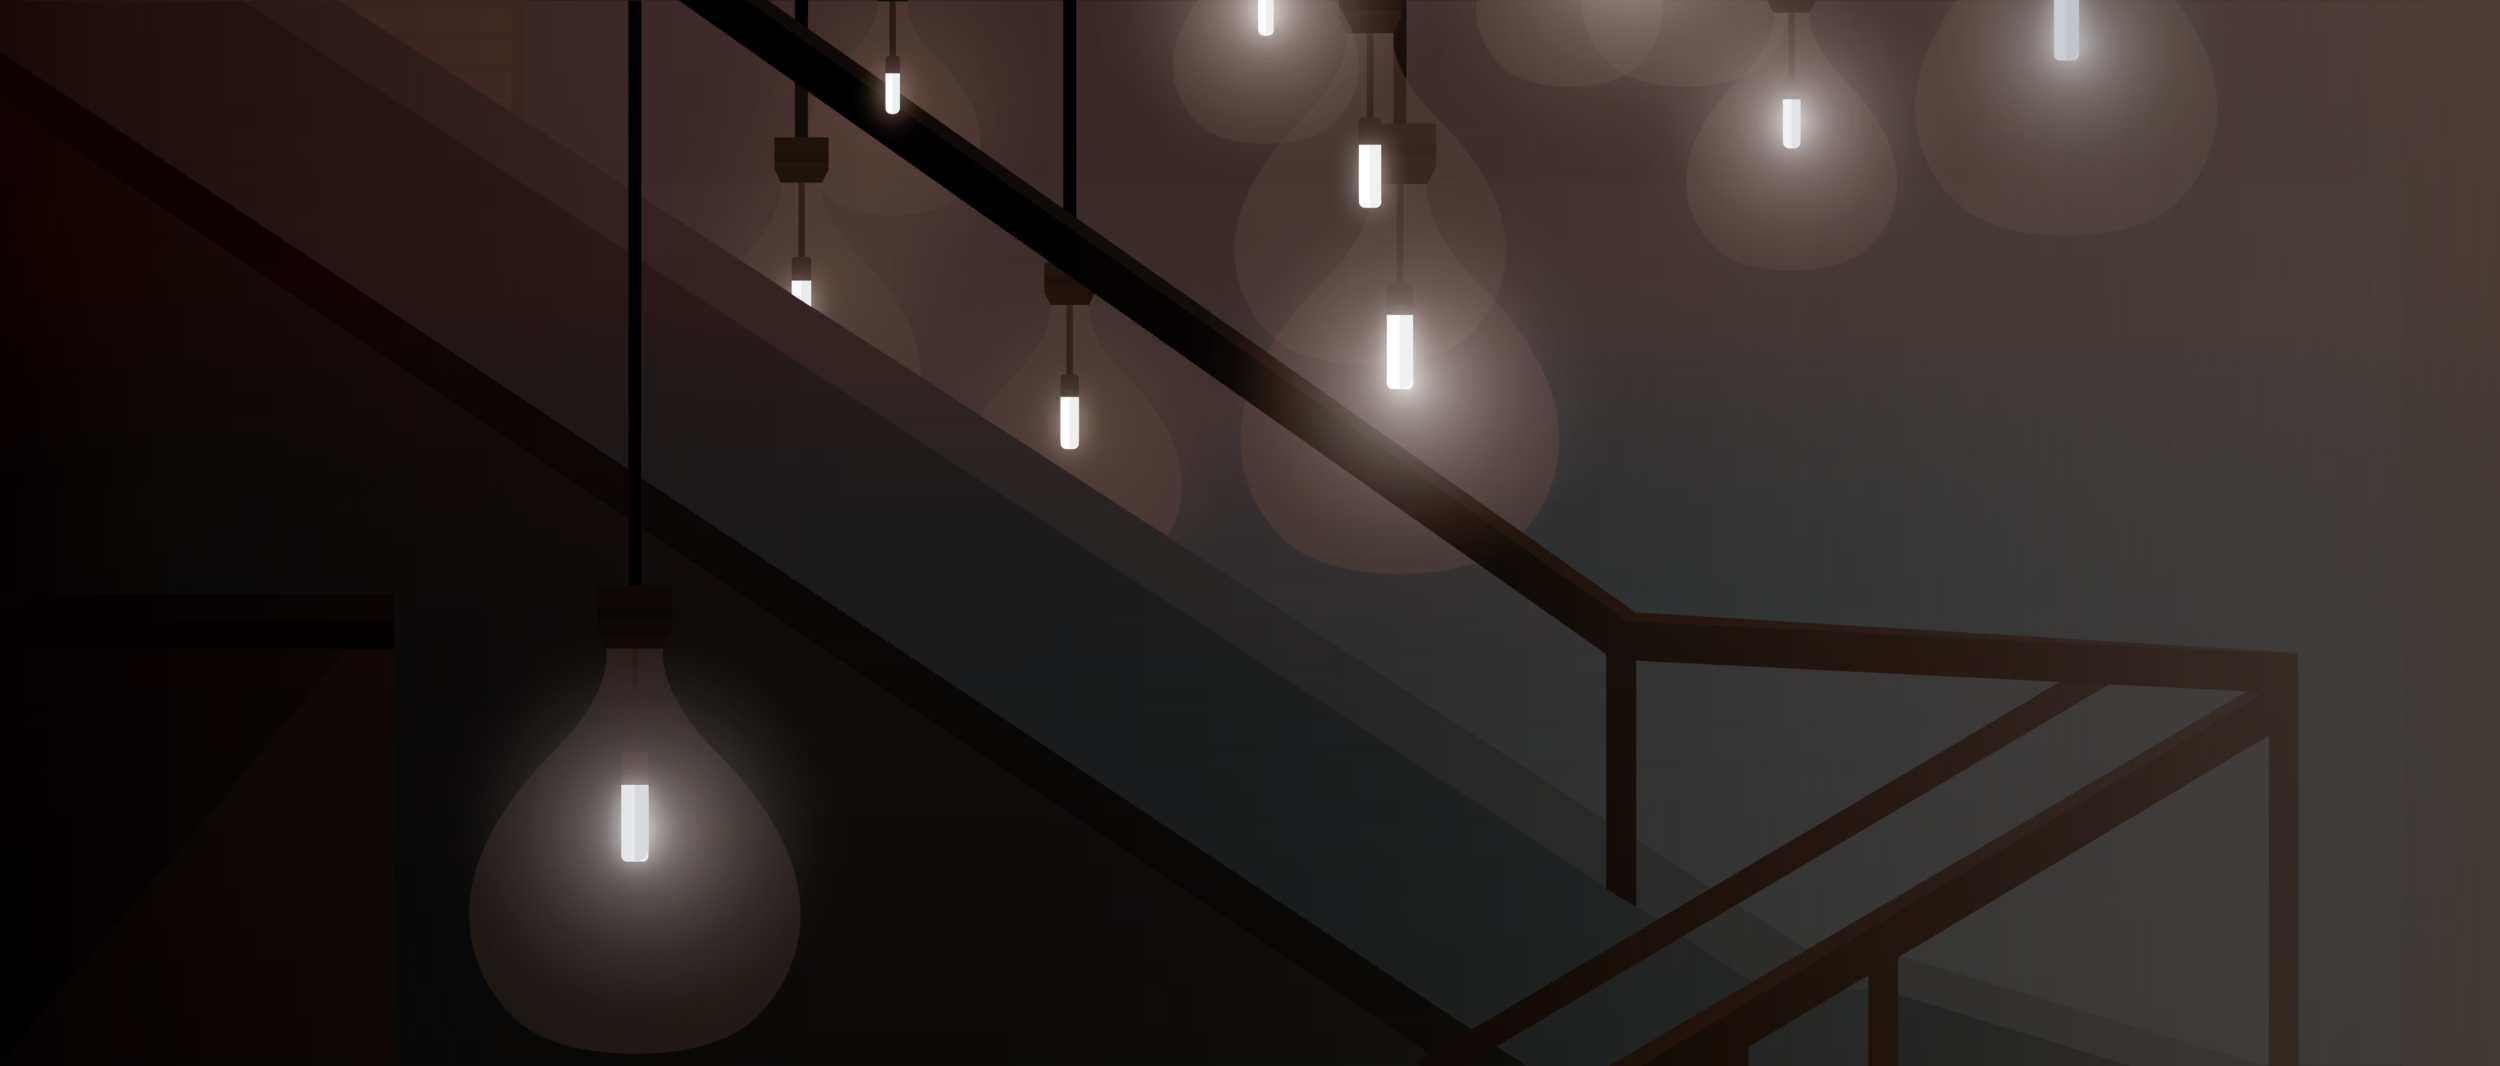 CL_HolidayVideo_Environment_Staircase_00a-01.png